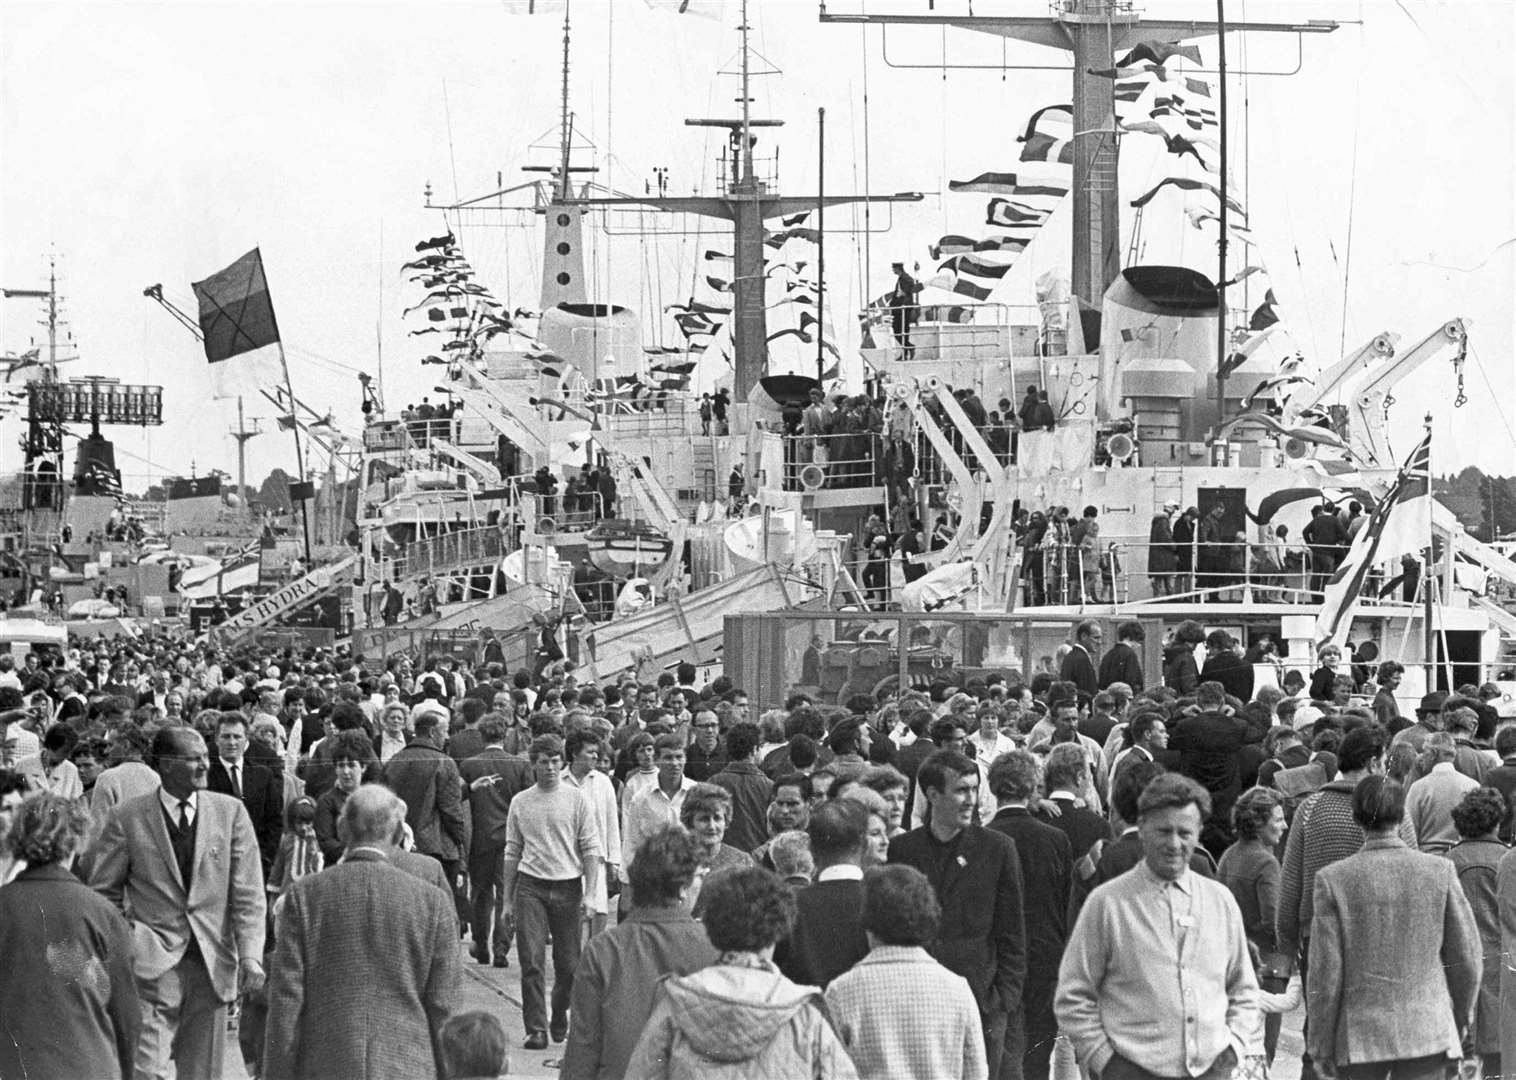 Huge crowds at Navy Days in Chatham in 1968